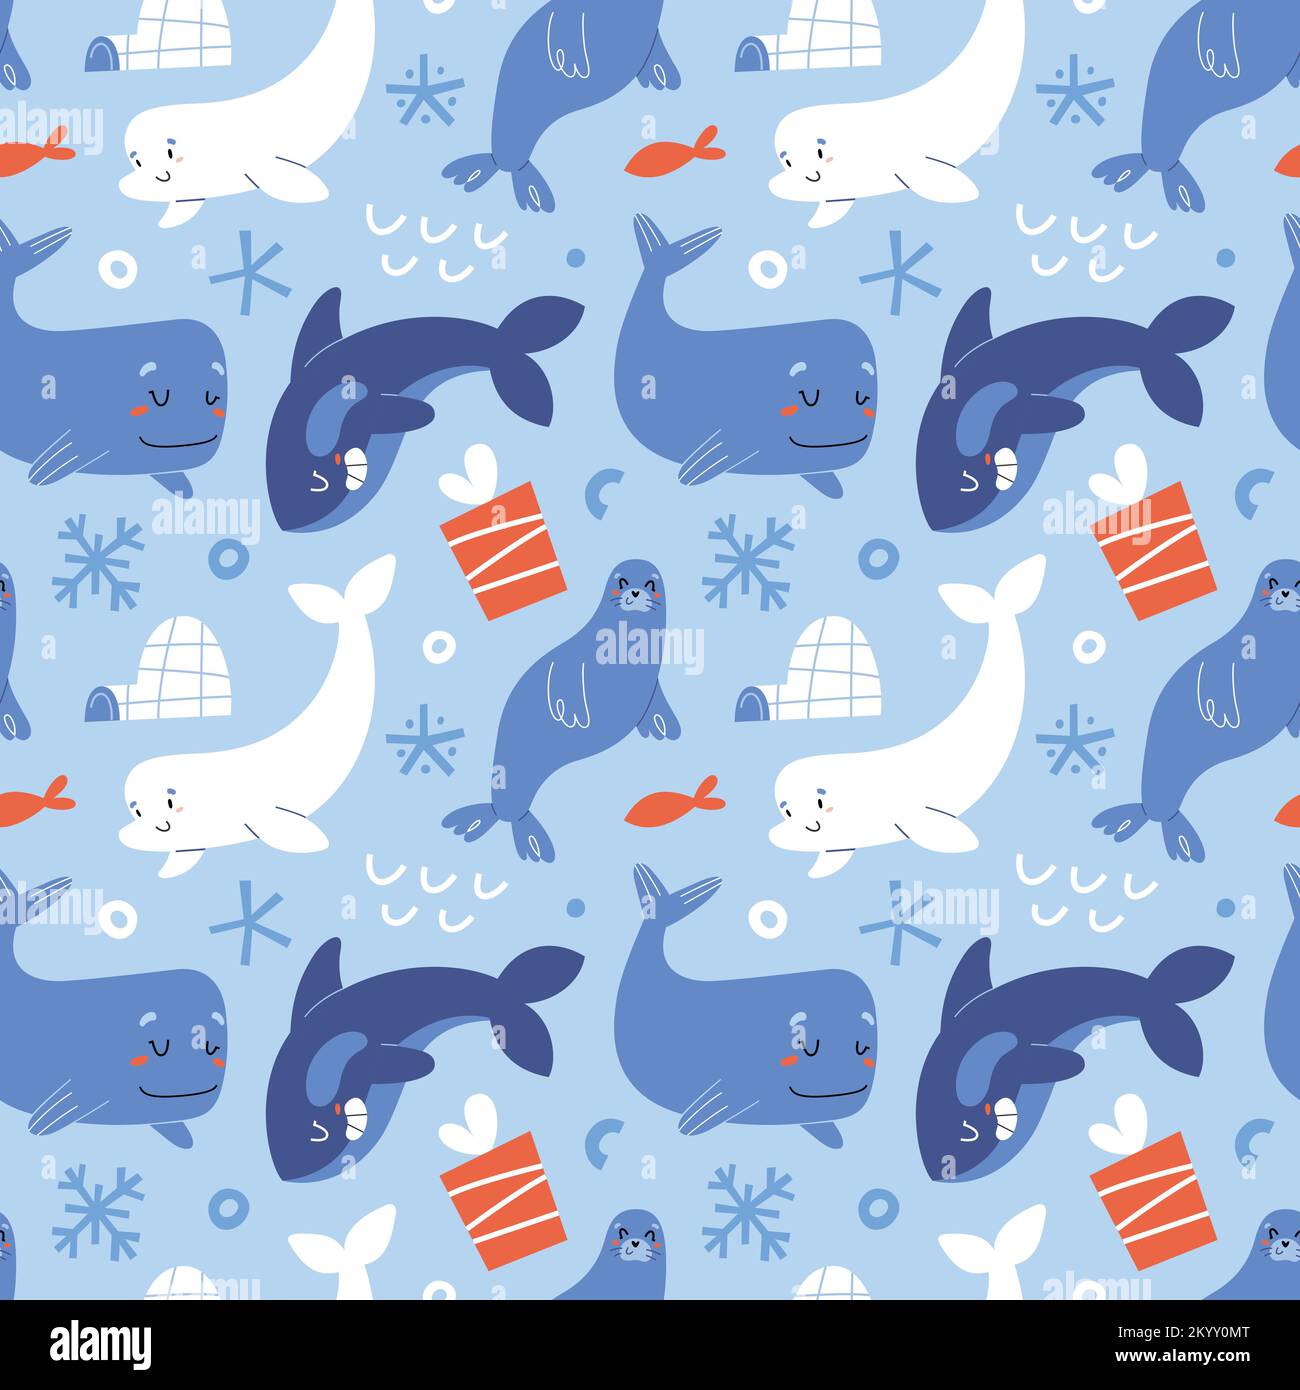 Arctic sea animals, cute blue whale, killer whale, beluga and seal, seamless pattern, adorable underwater mammals, Christmas print Stock Vector